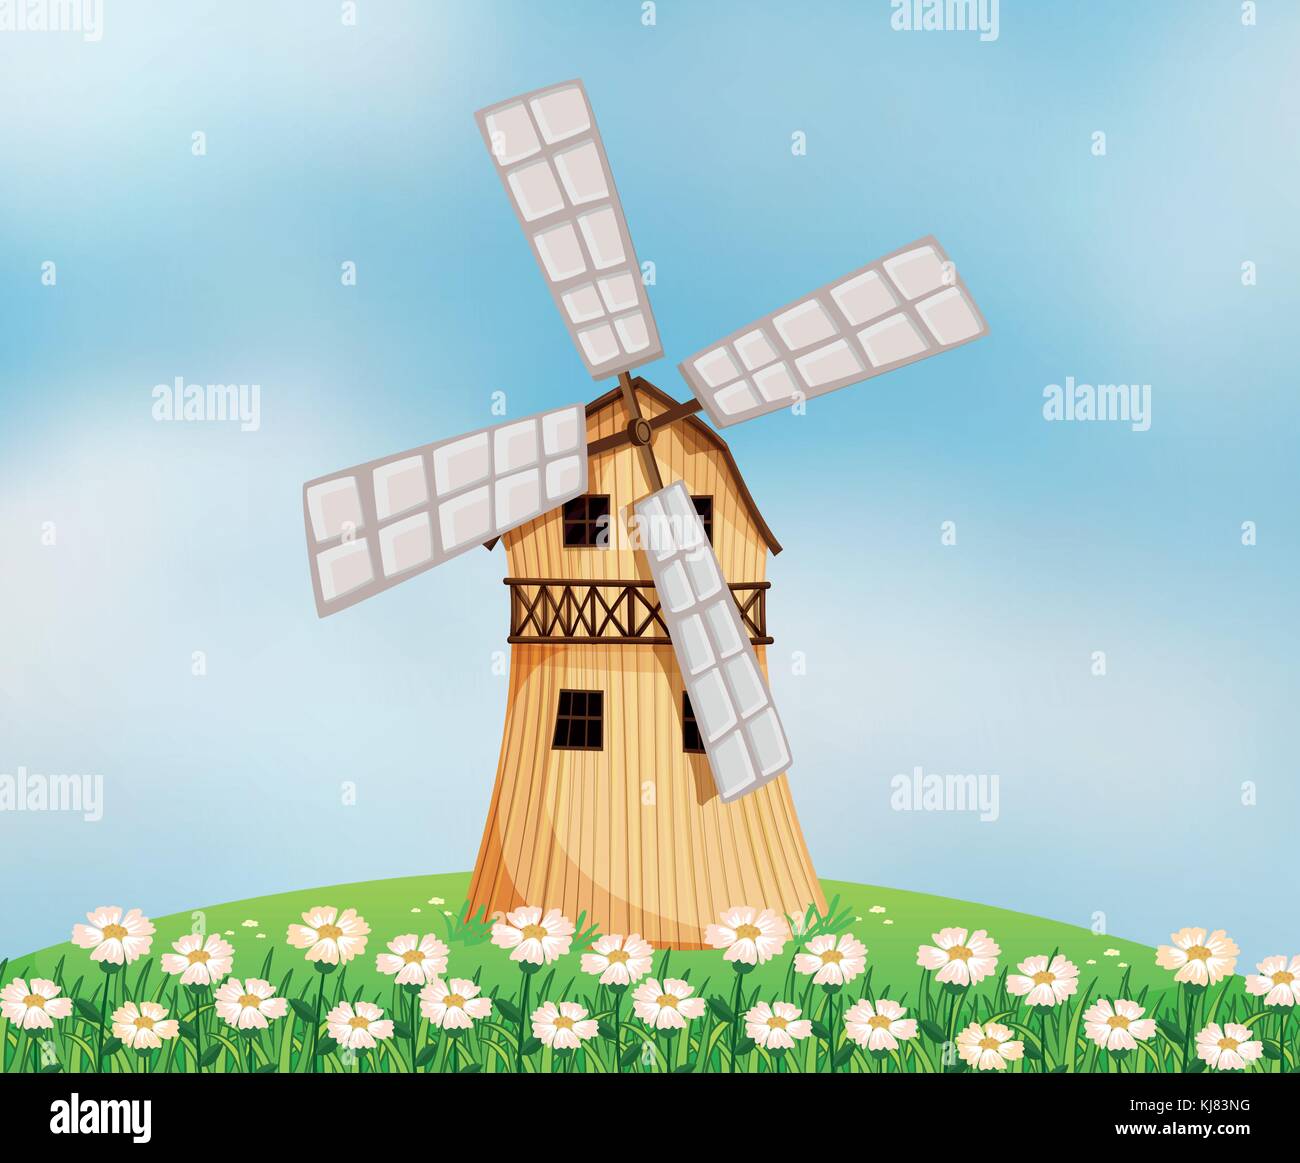 Illustration of a barn with a windmill Stock Vector